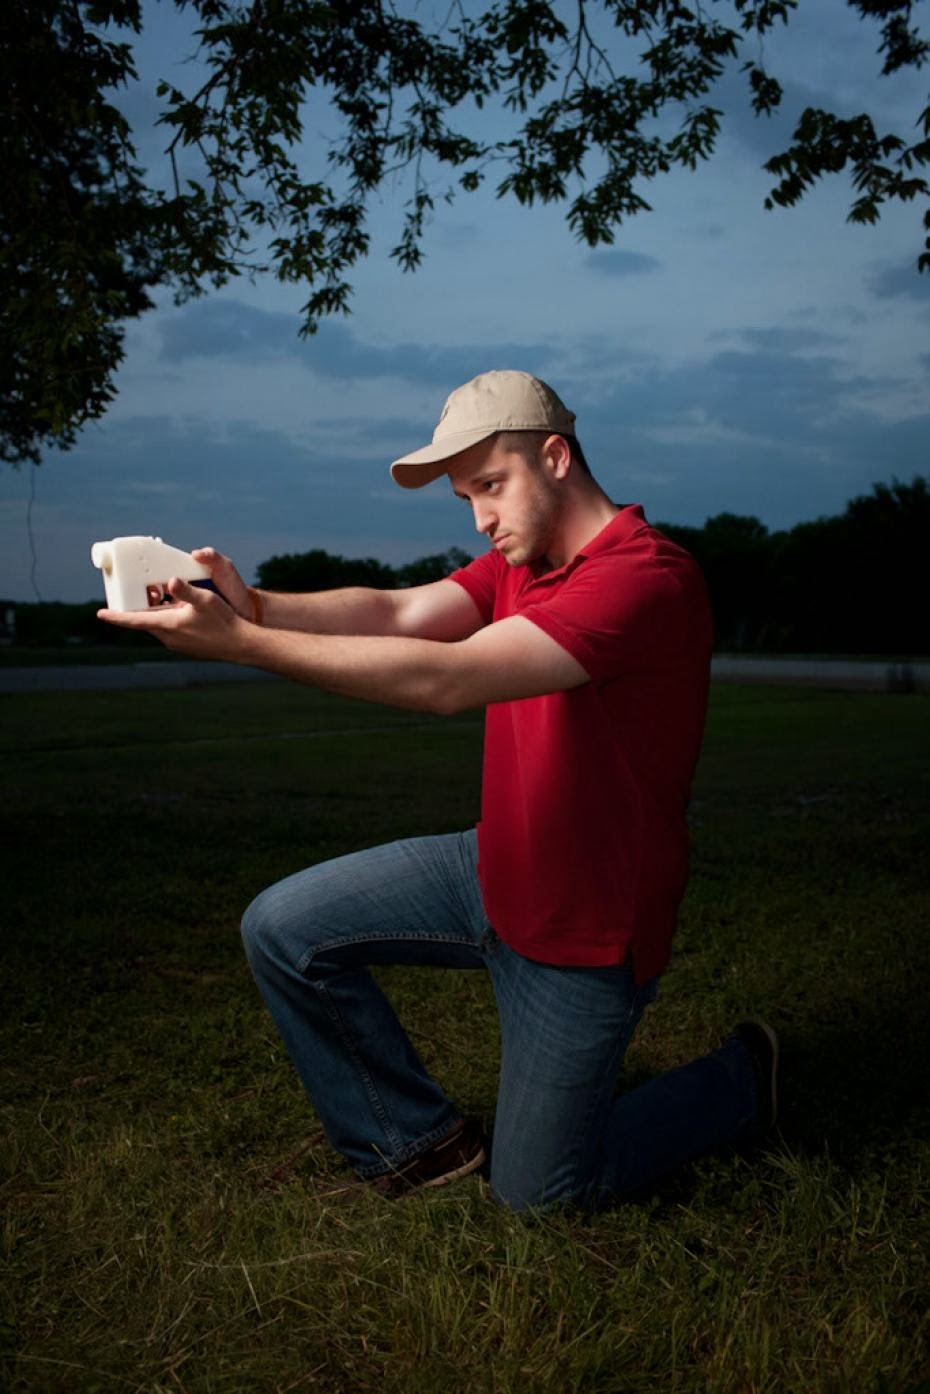 crypto-anarchist & libertarian Cody Wilson,  co-founder of Defense Distributed  holding his creation 'Liberator'-the 3D-gun